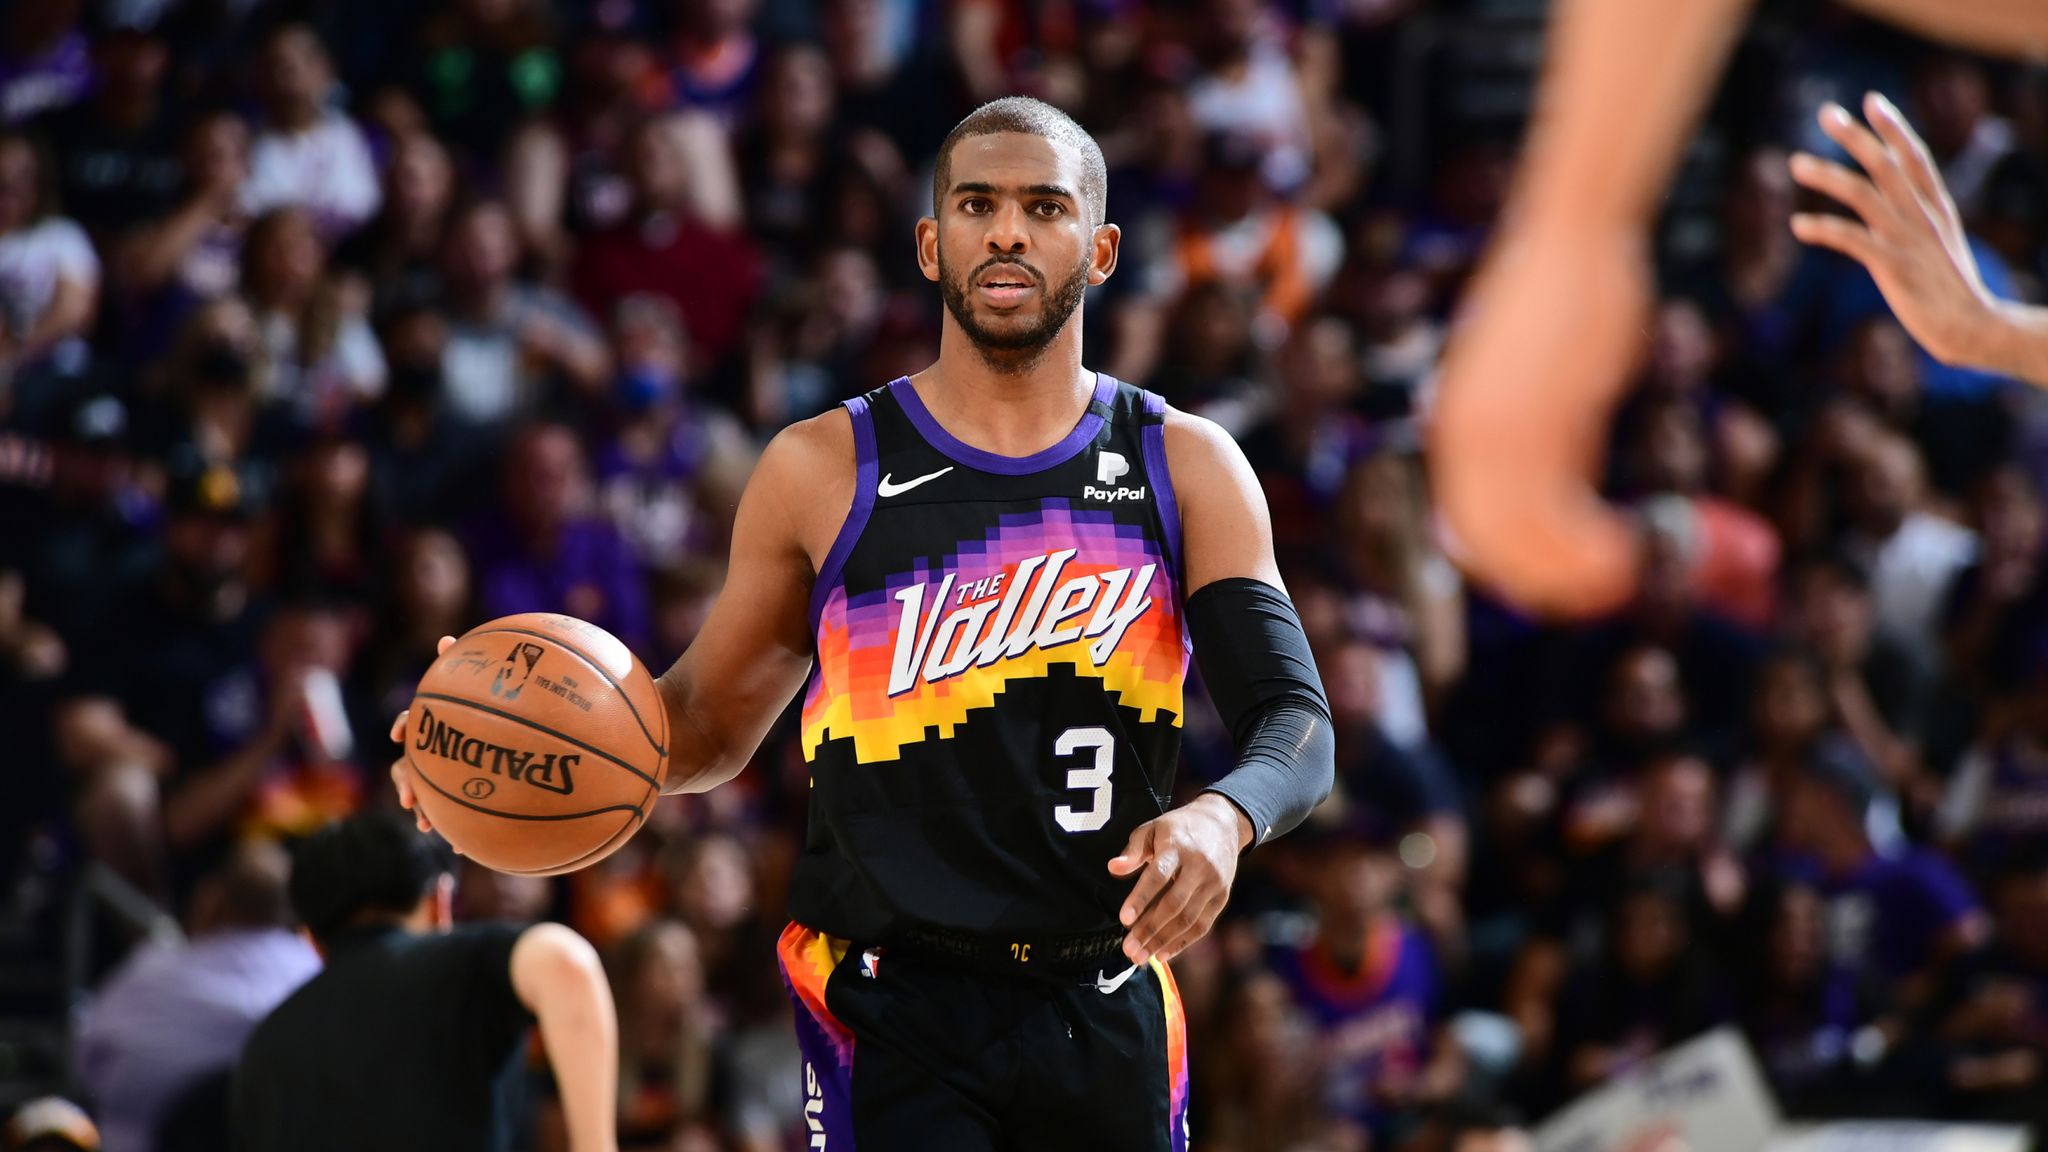 After 12 agonising playoff runs, is this finally the year Chris Paul